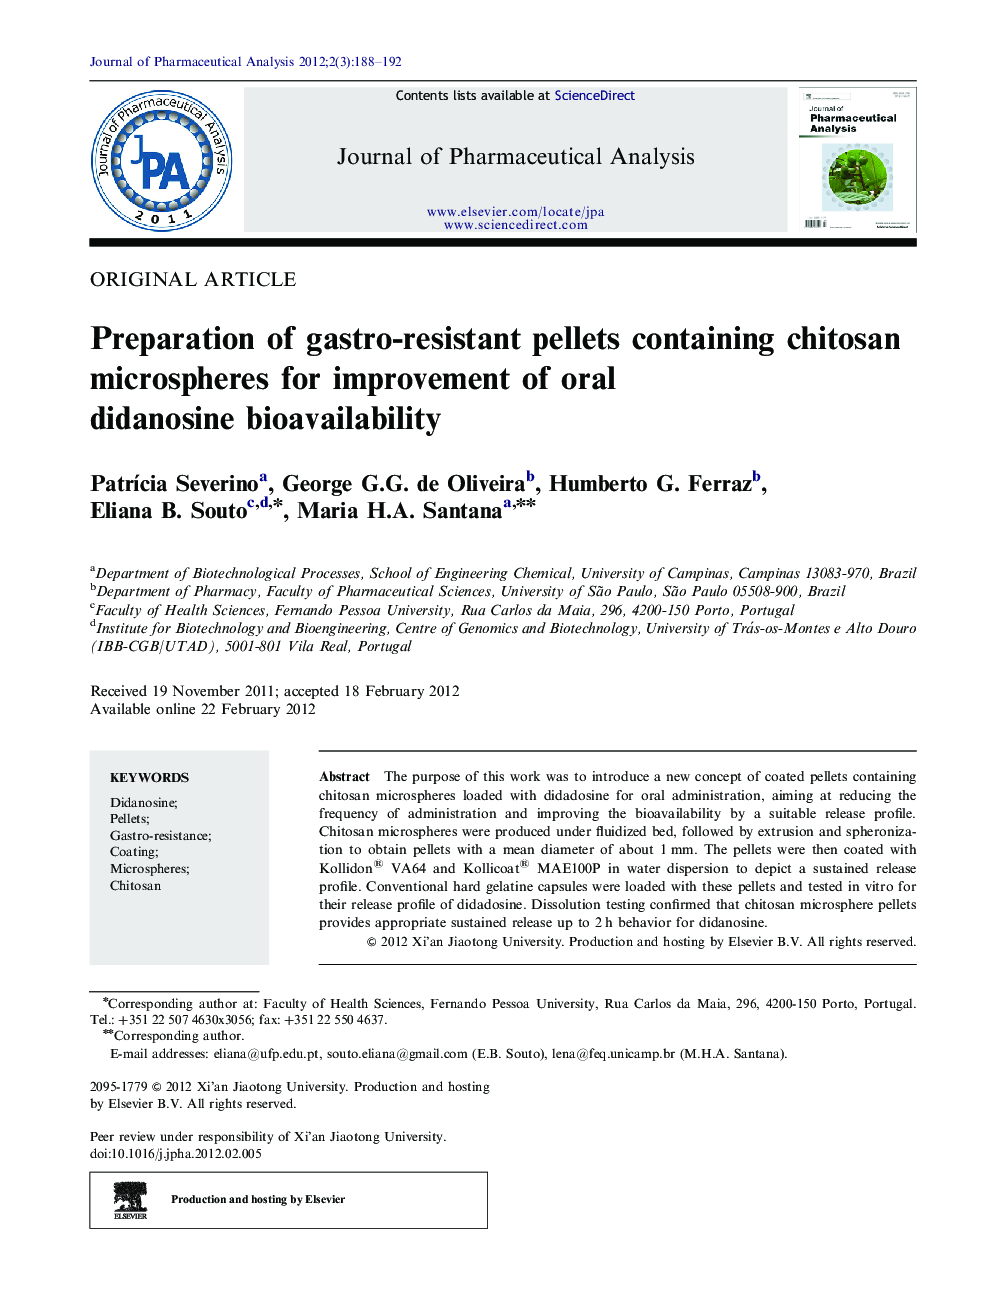 Preparation of gastro-resistant pellets containing chitosan microspheres for improvement of oral didanosine bioavailability